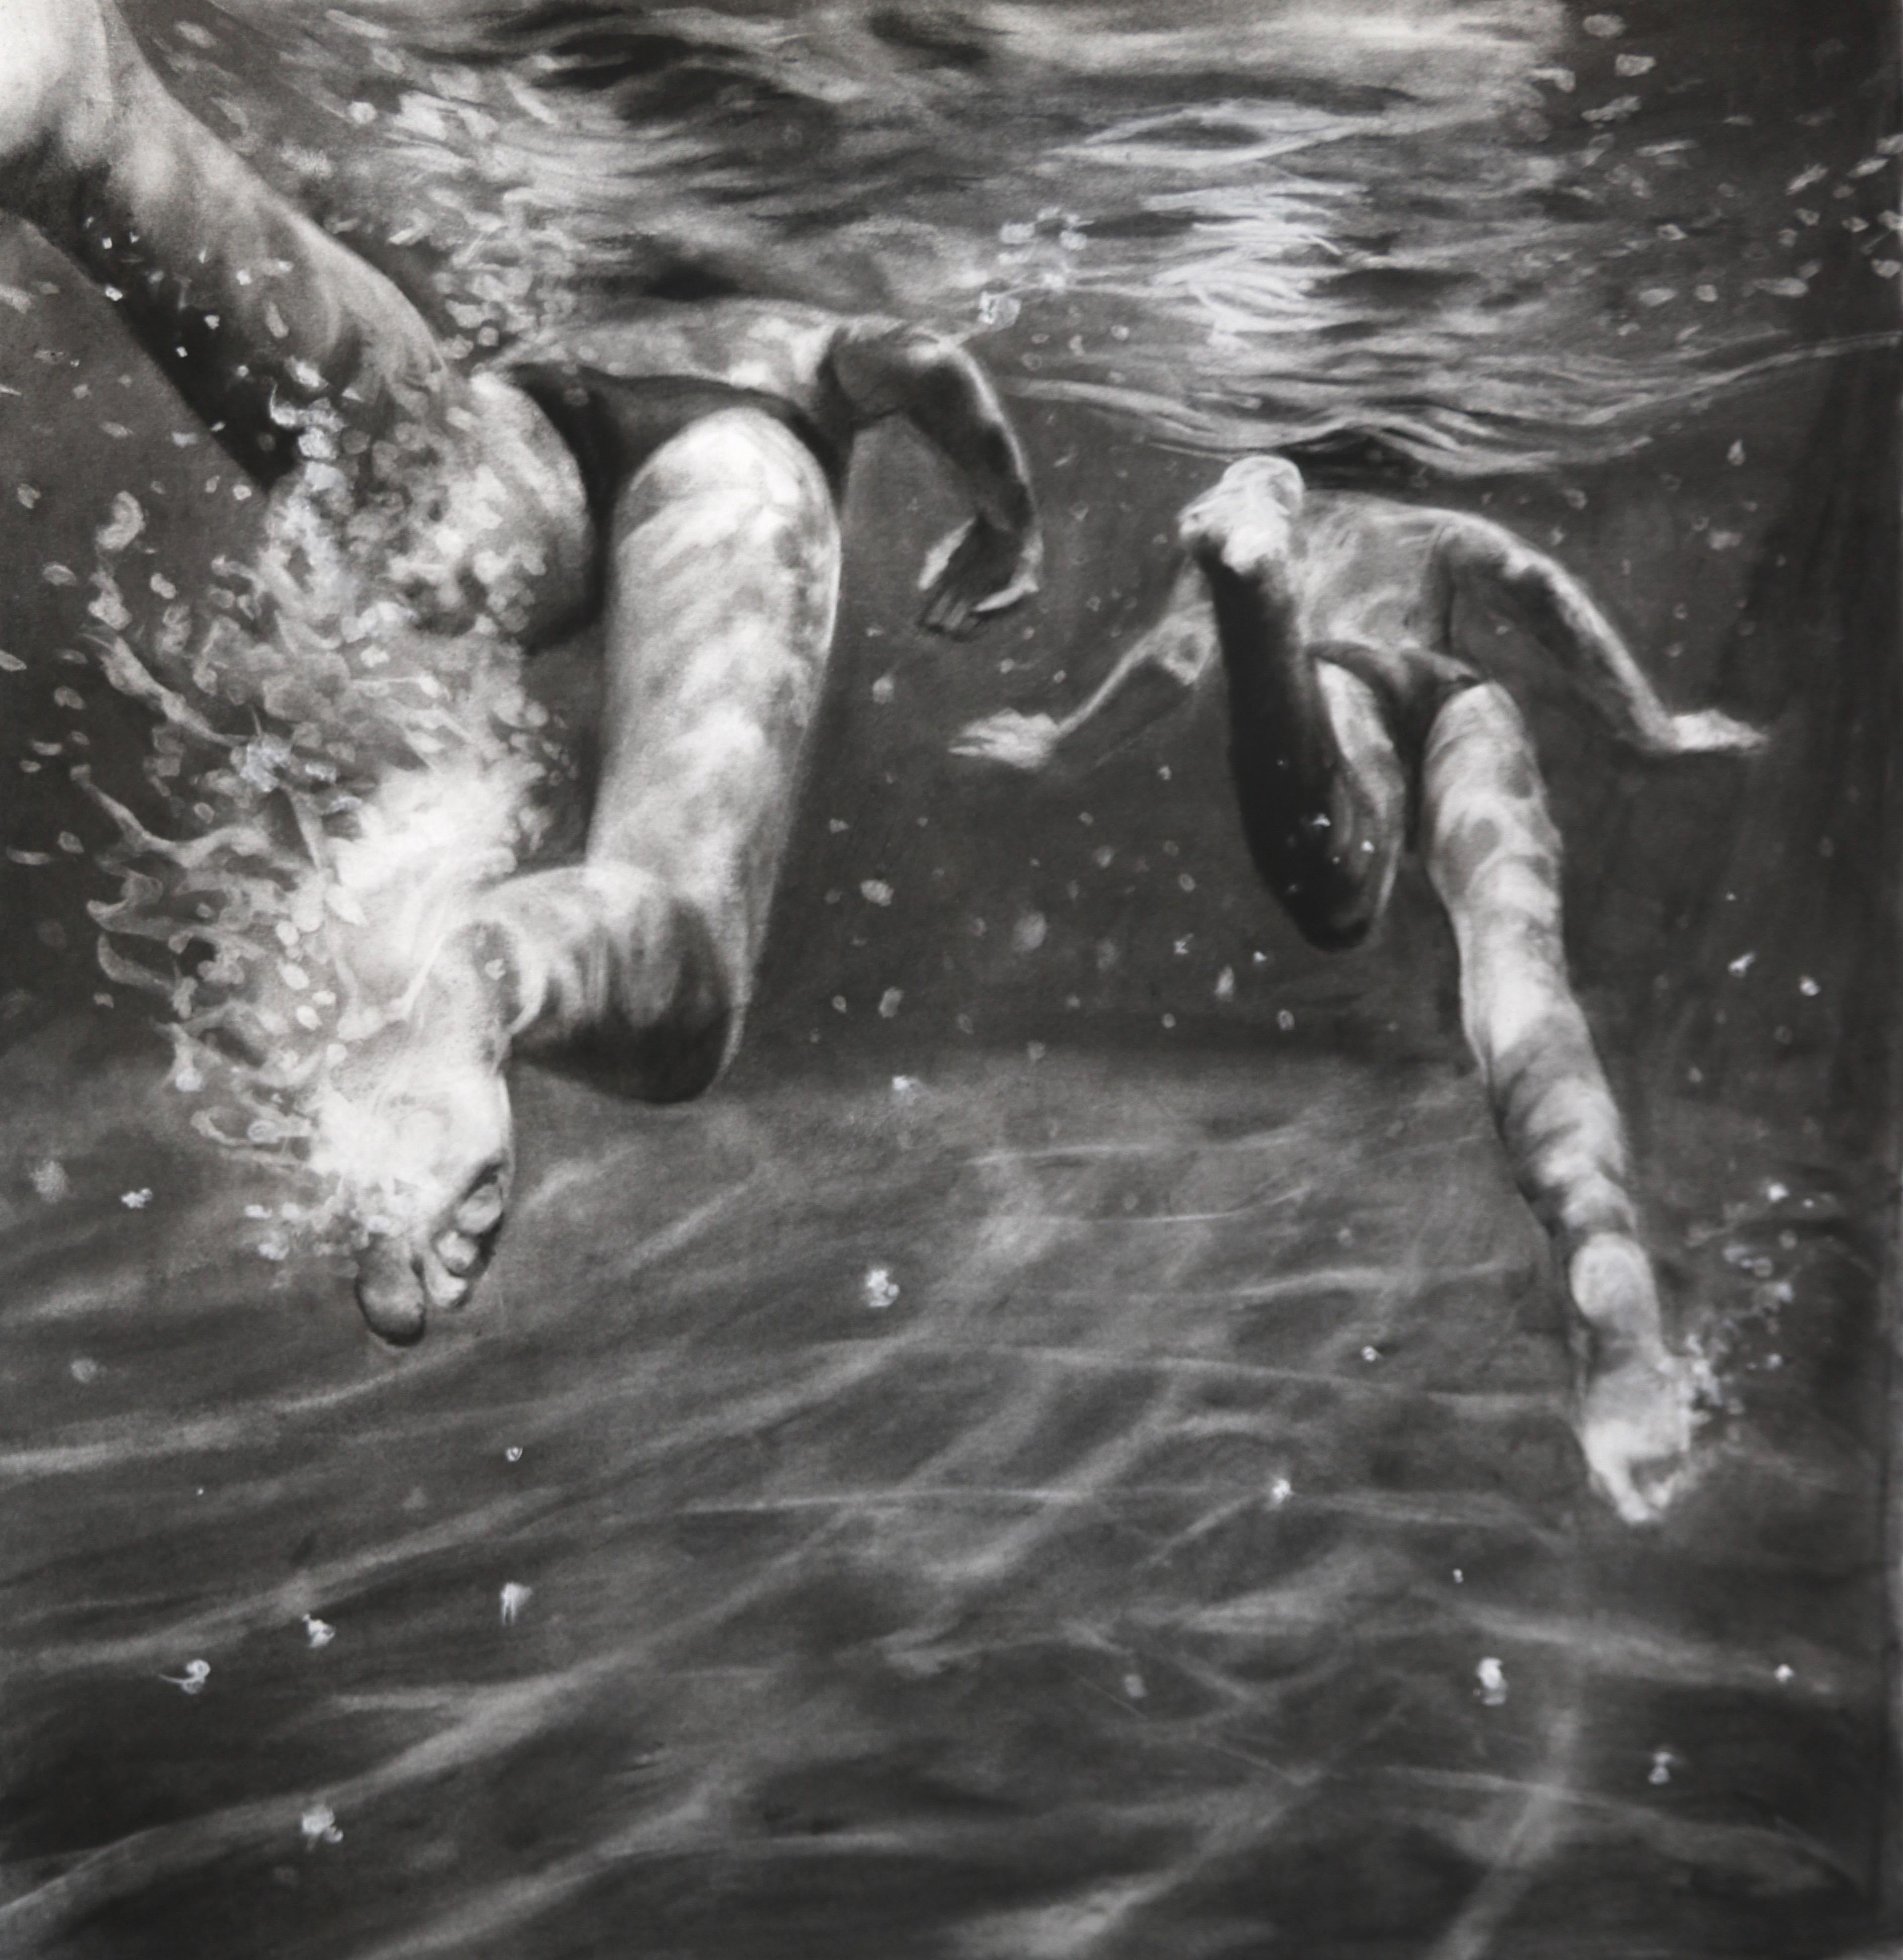 Patsy McArthur Nude - The Race, Dynamic underwater swimmers, Charcoal and graphite on Fabriano paper